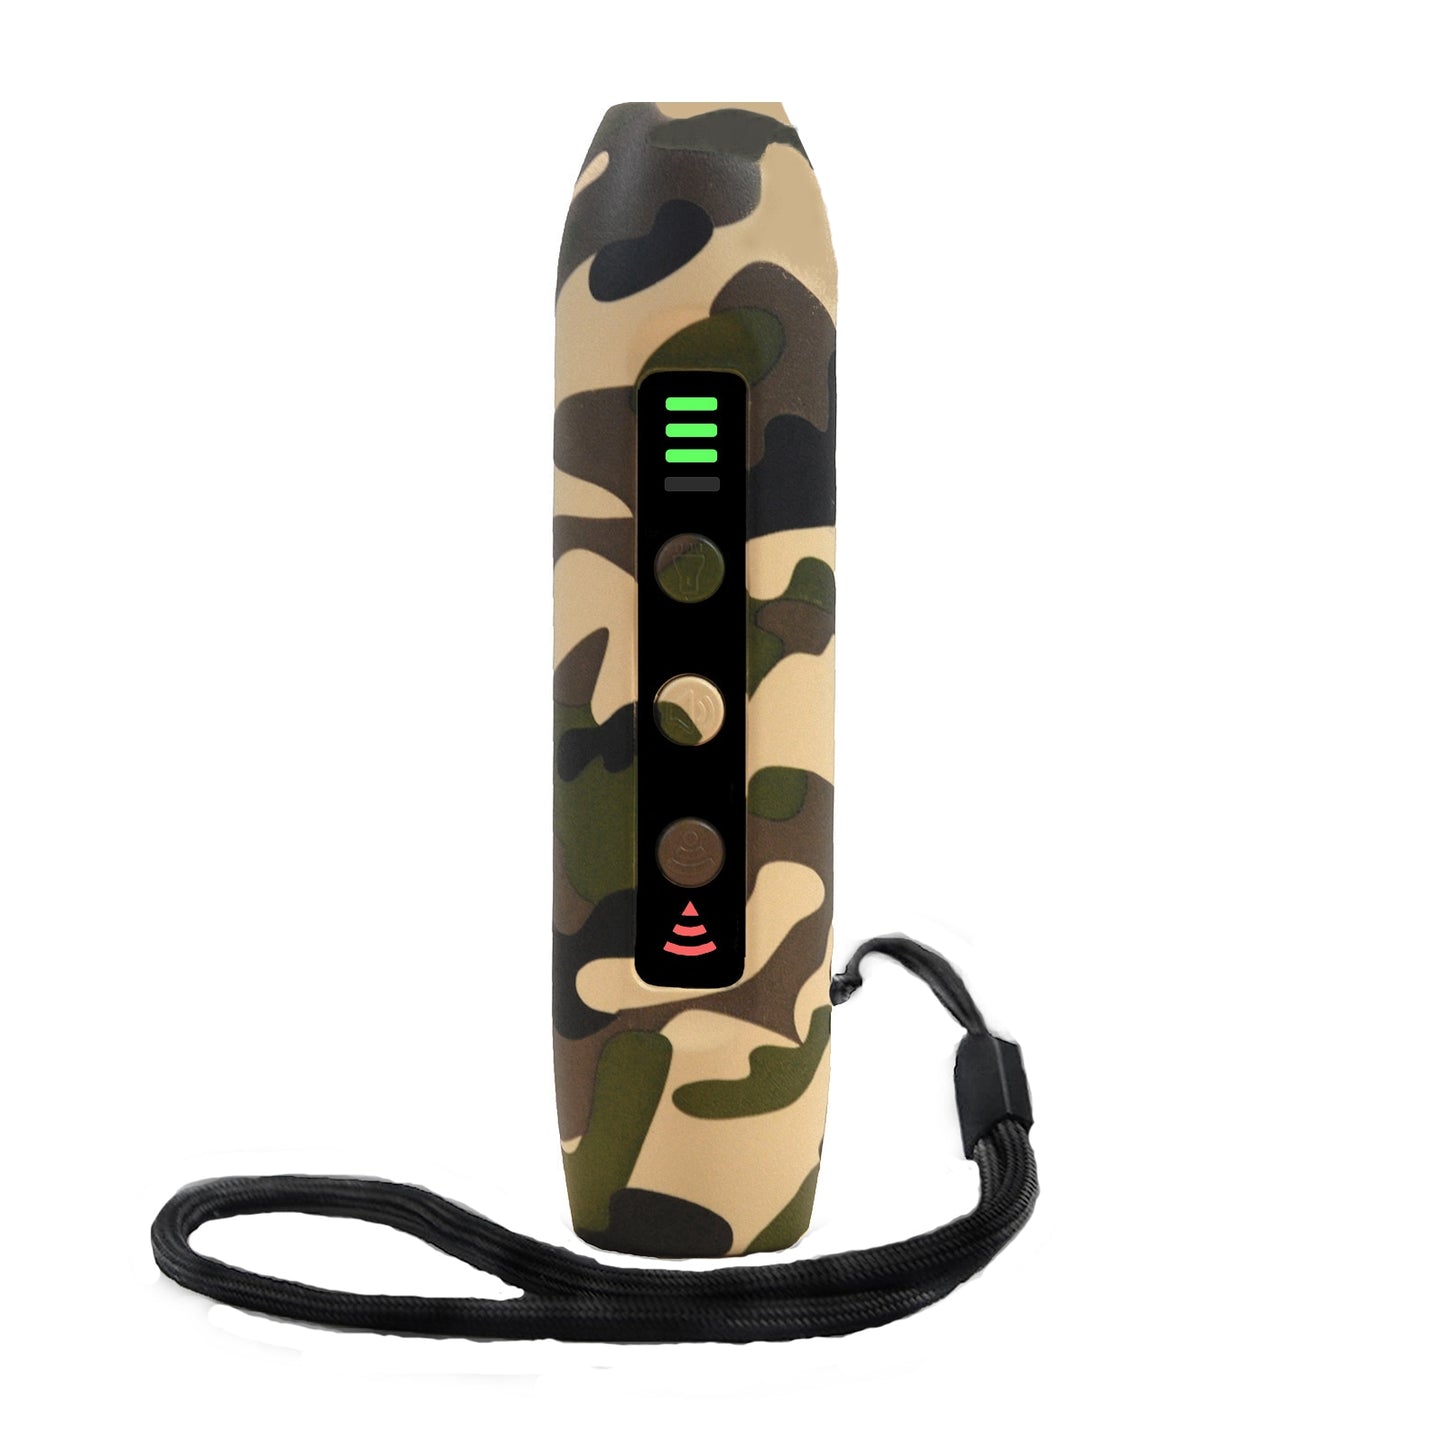 Dog Bark Deterrent Devices Training 3 modes USB Rechargeable.